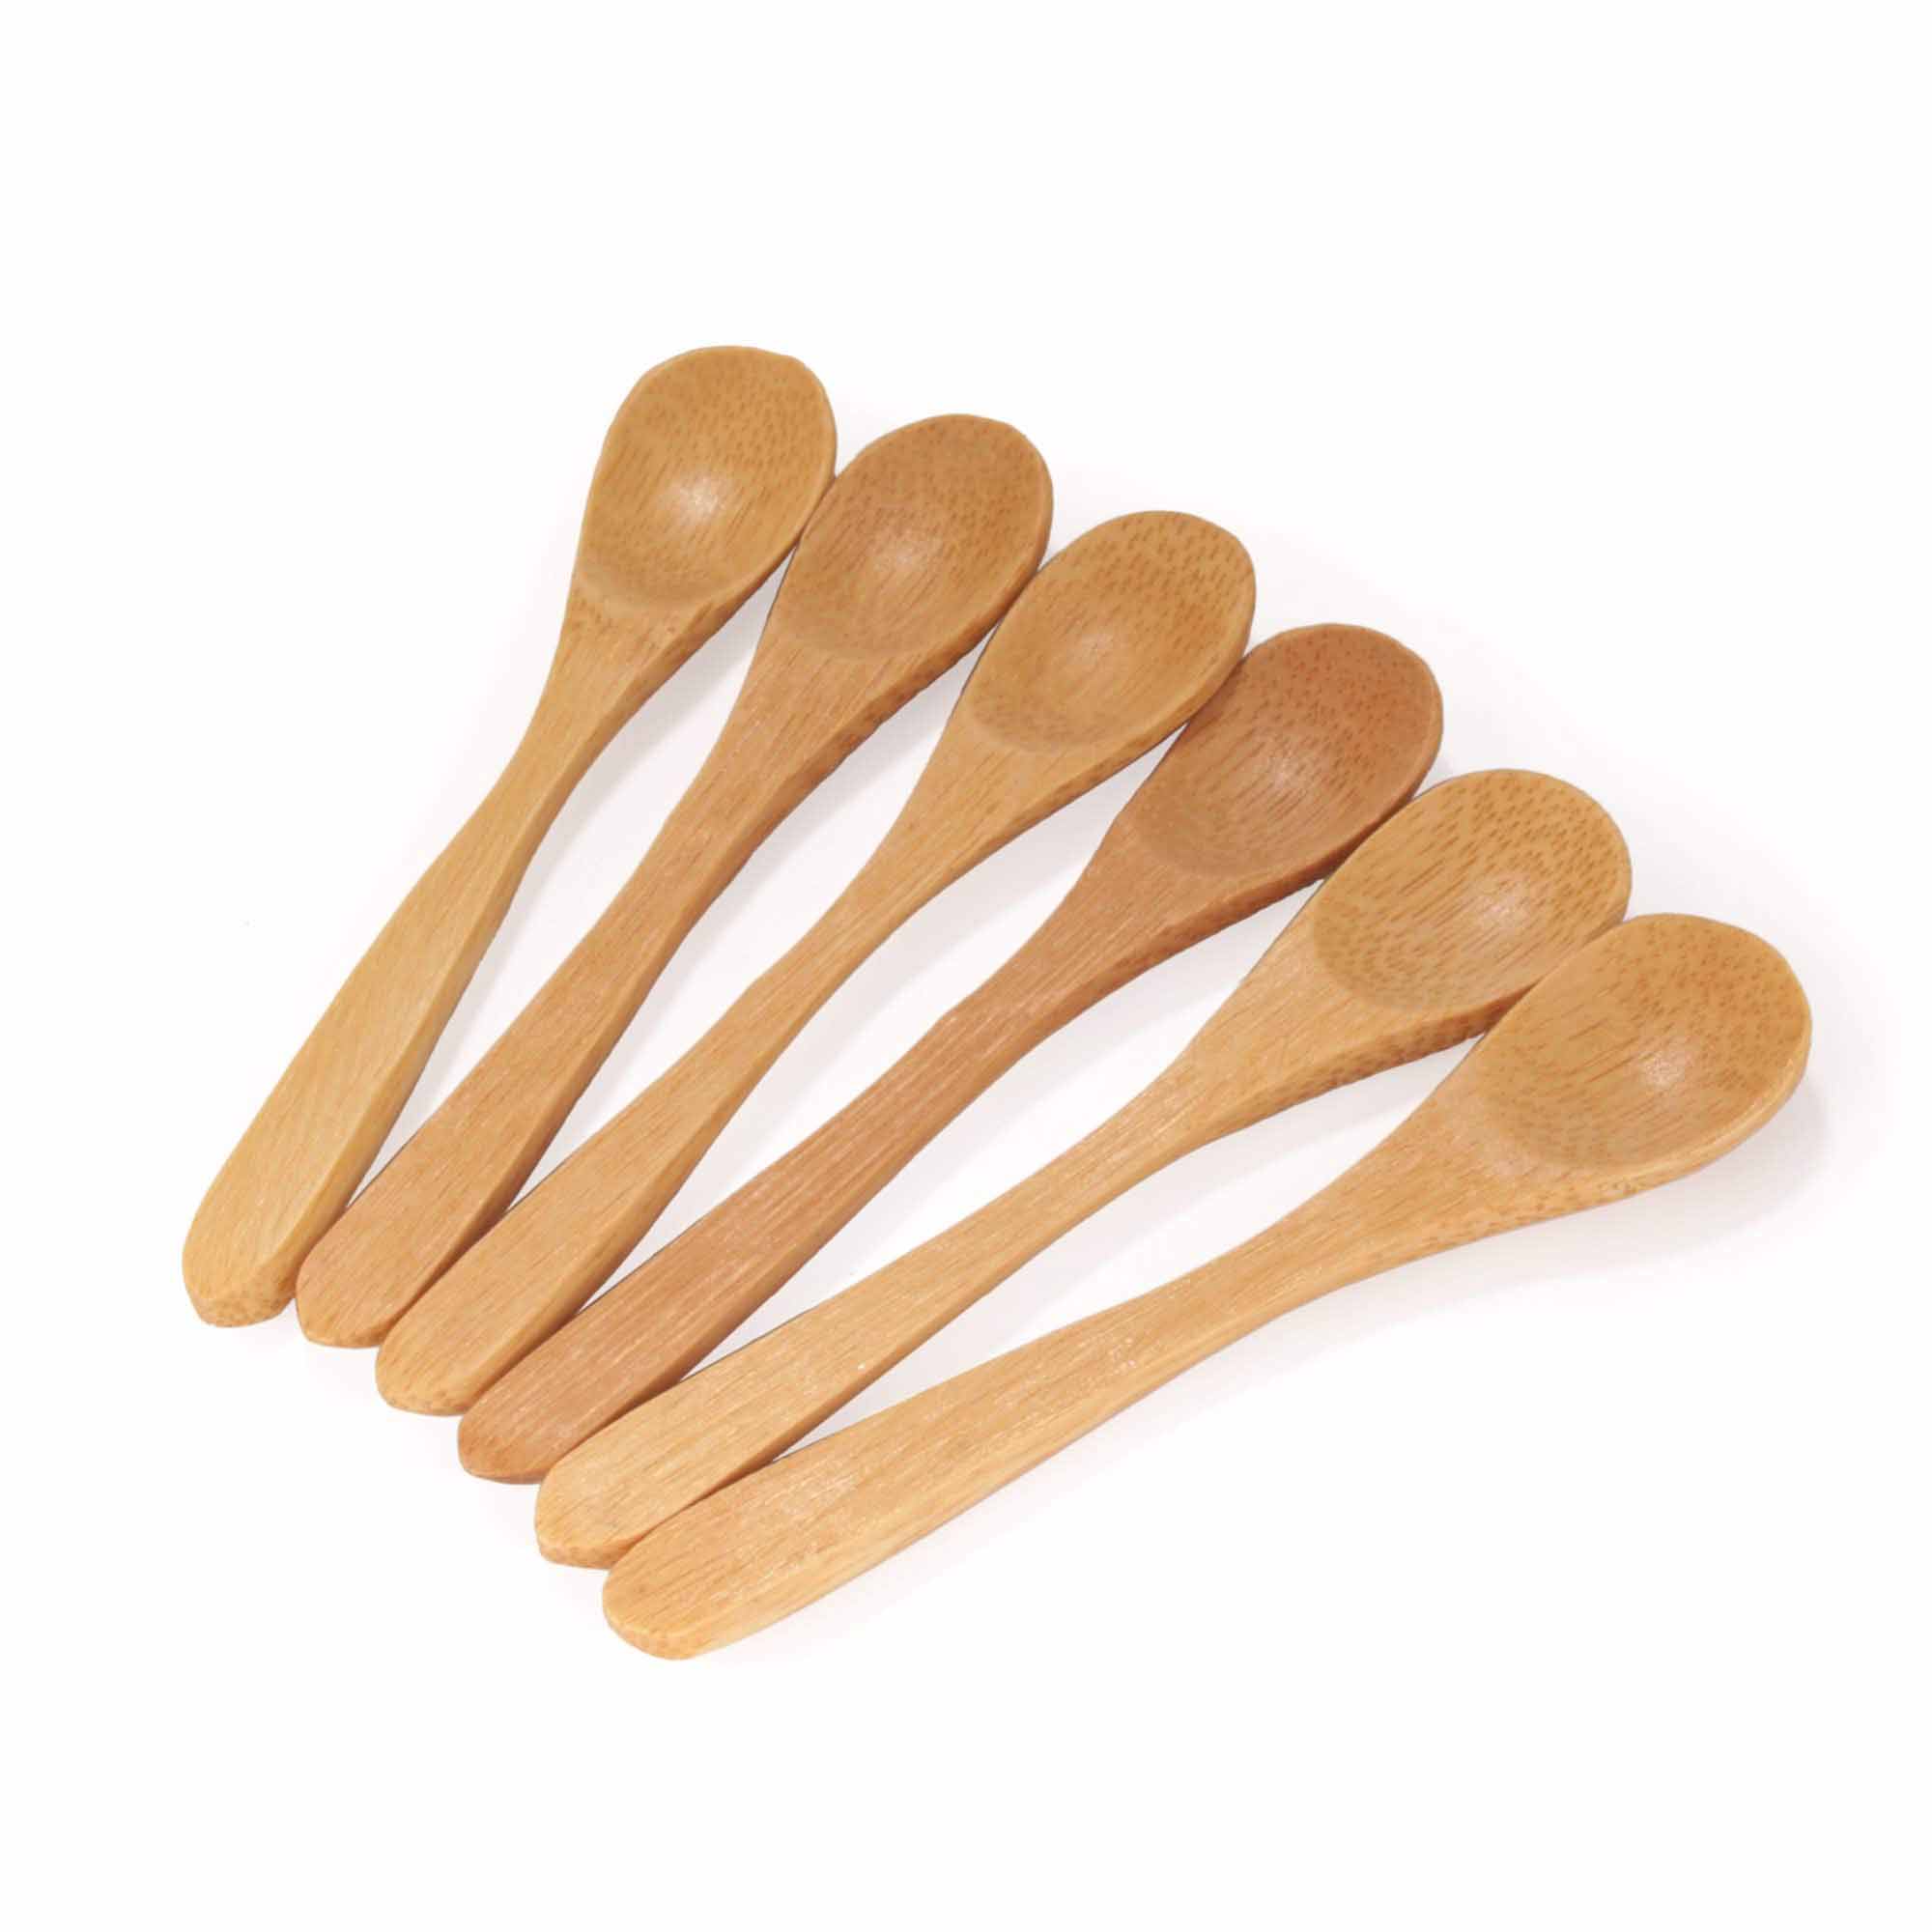 http://bamboomn.com/cdn/shop/products/Small_20Bamboo_20Salt_20Spice_20Spoon_20-_20Oval_20Head_20-_20Carbonized_20Brown_20msov-010-br-035.jpg?v=1627046889